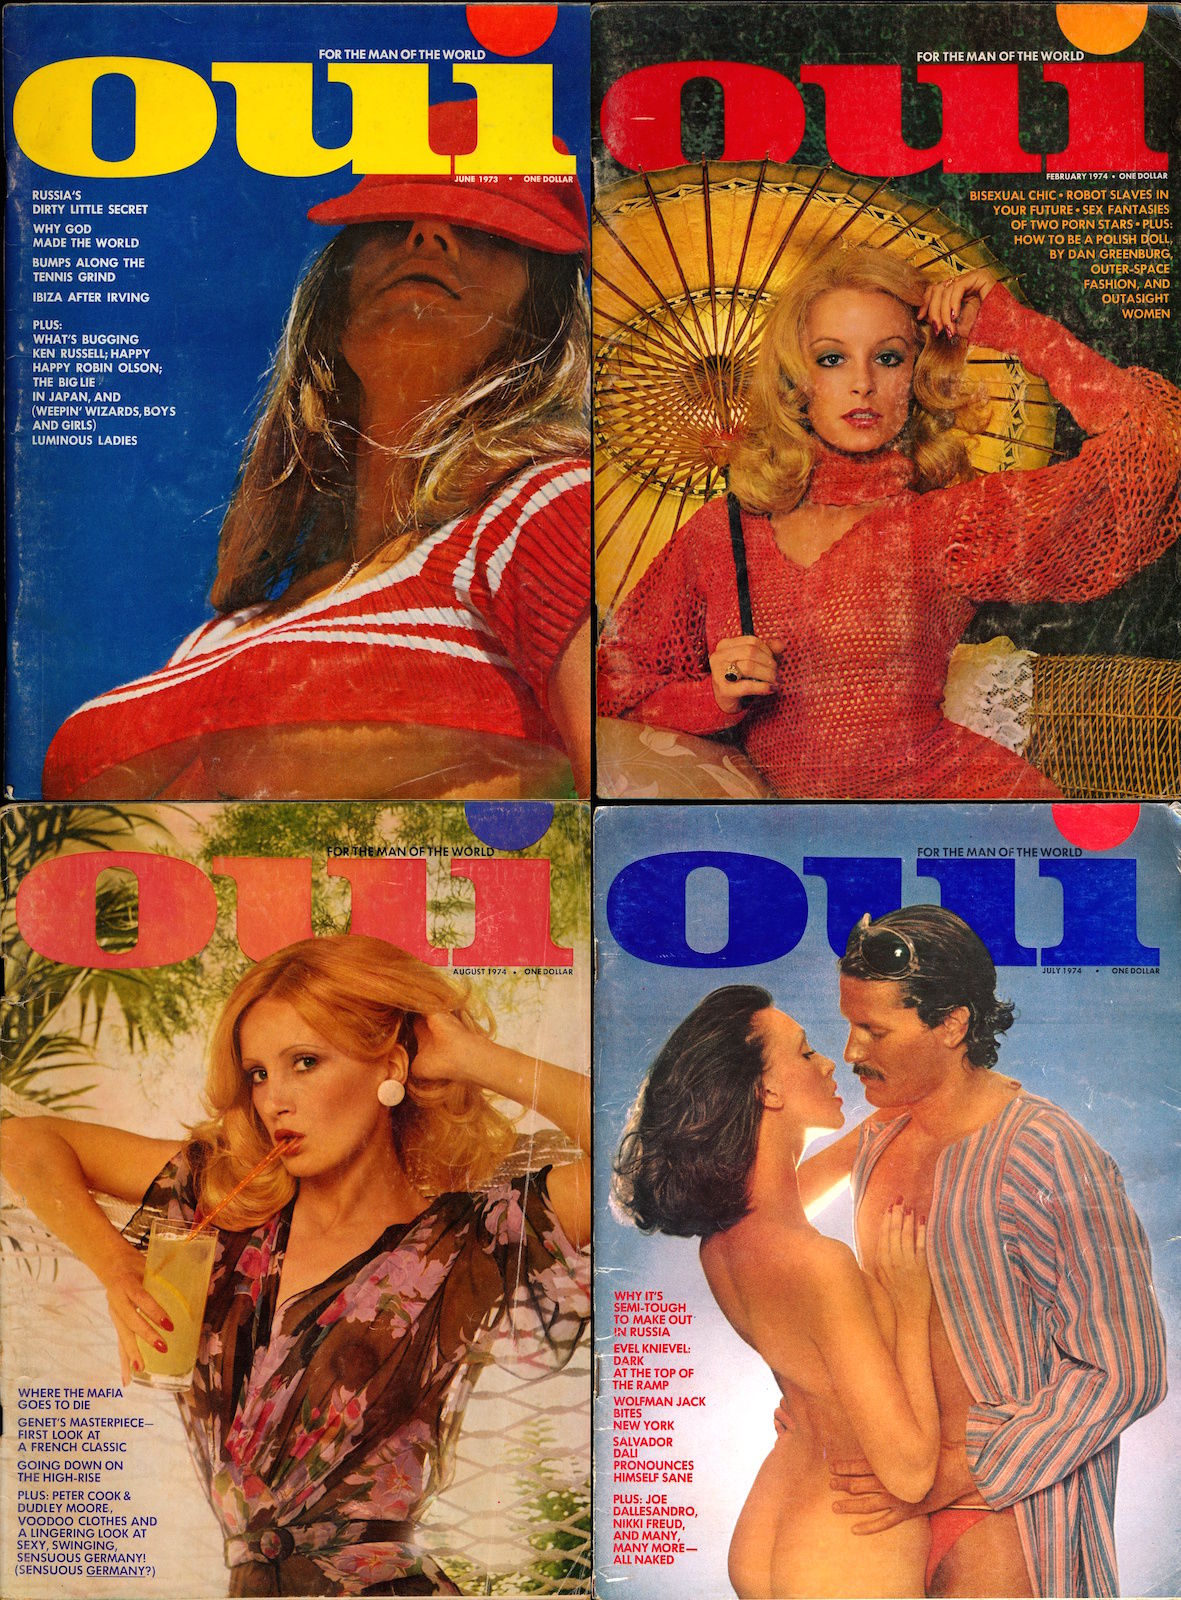 French Sex Magazines - Oui [For the Man of the World] (4 vintage ...